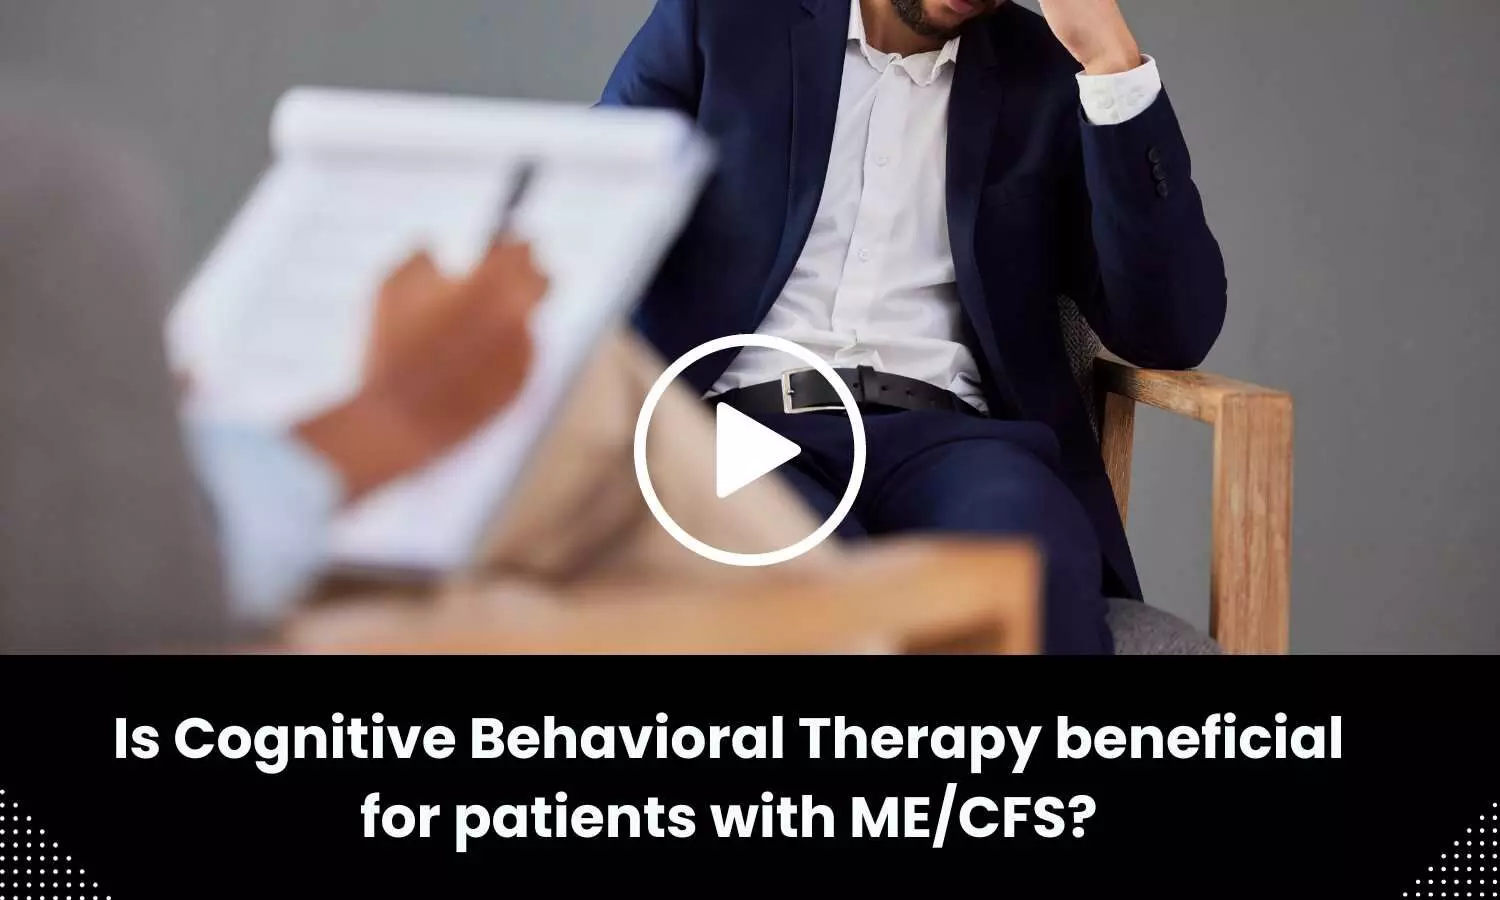 Is Cognitive Behavioral Therapy beneficial for patients with ME/CFS?